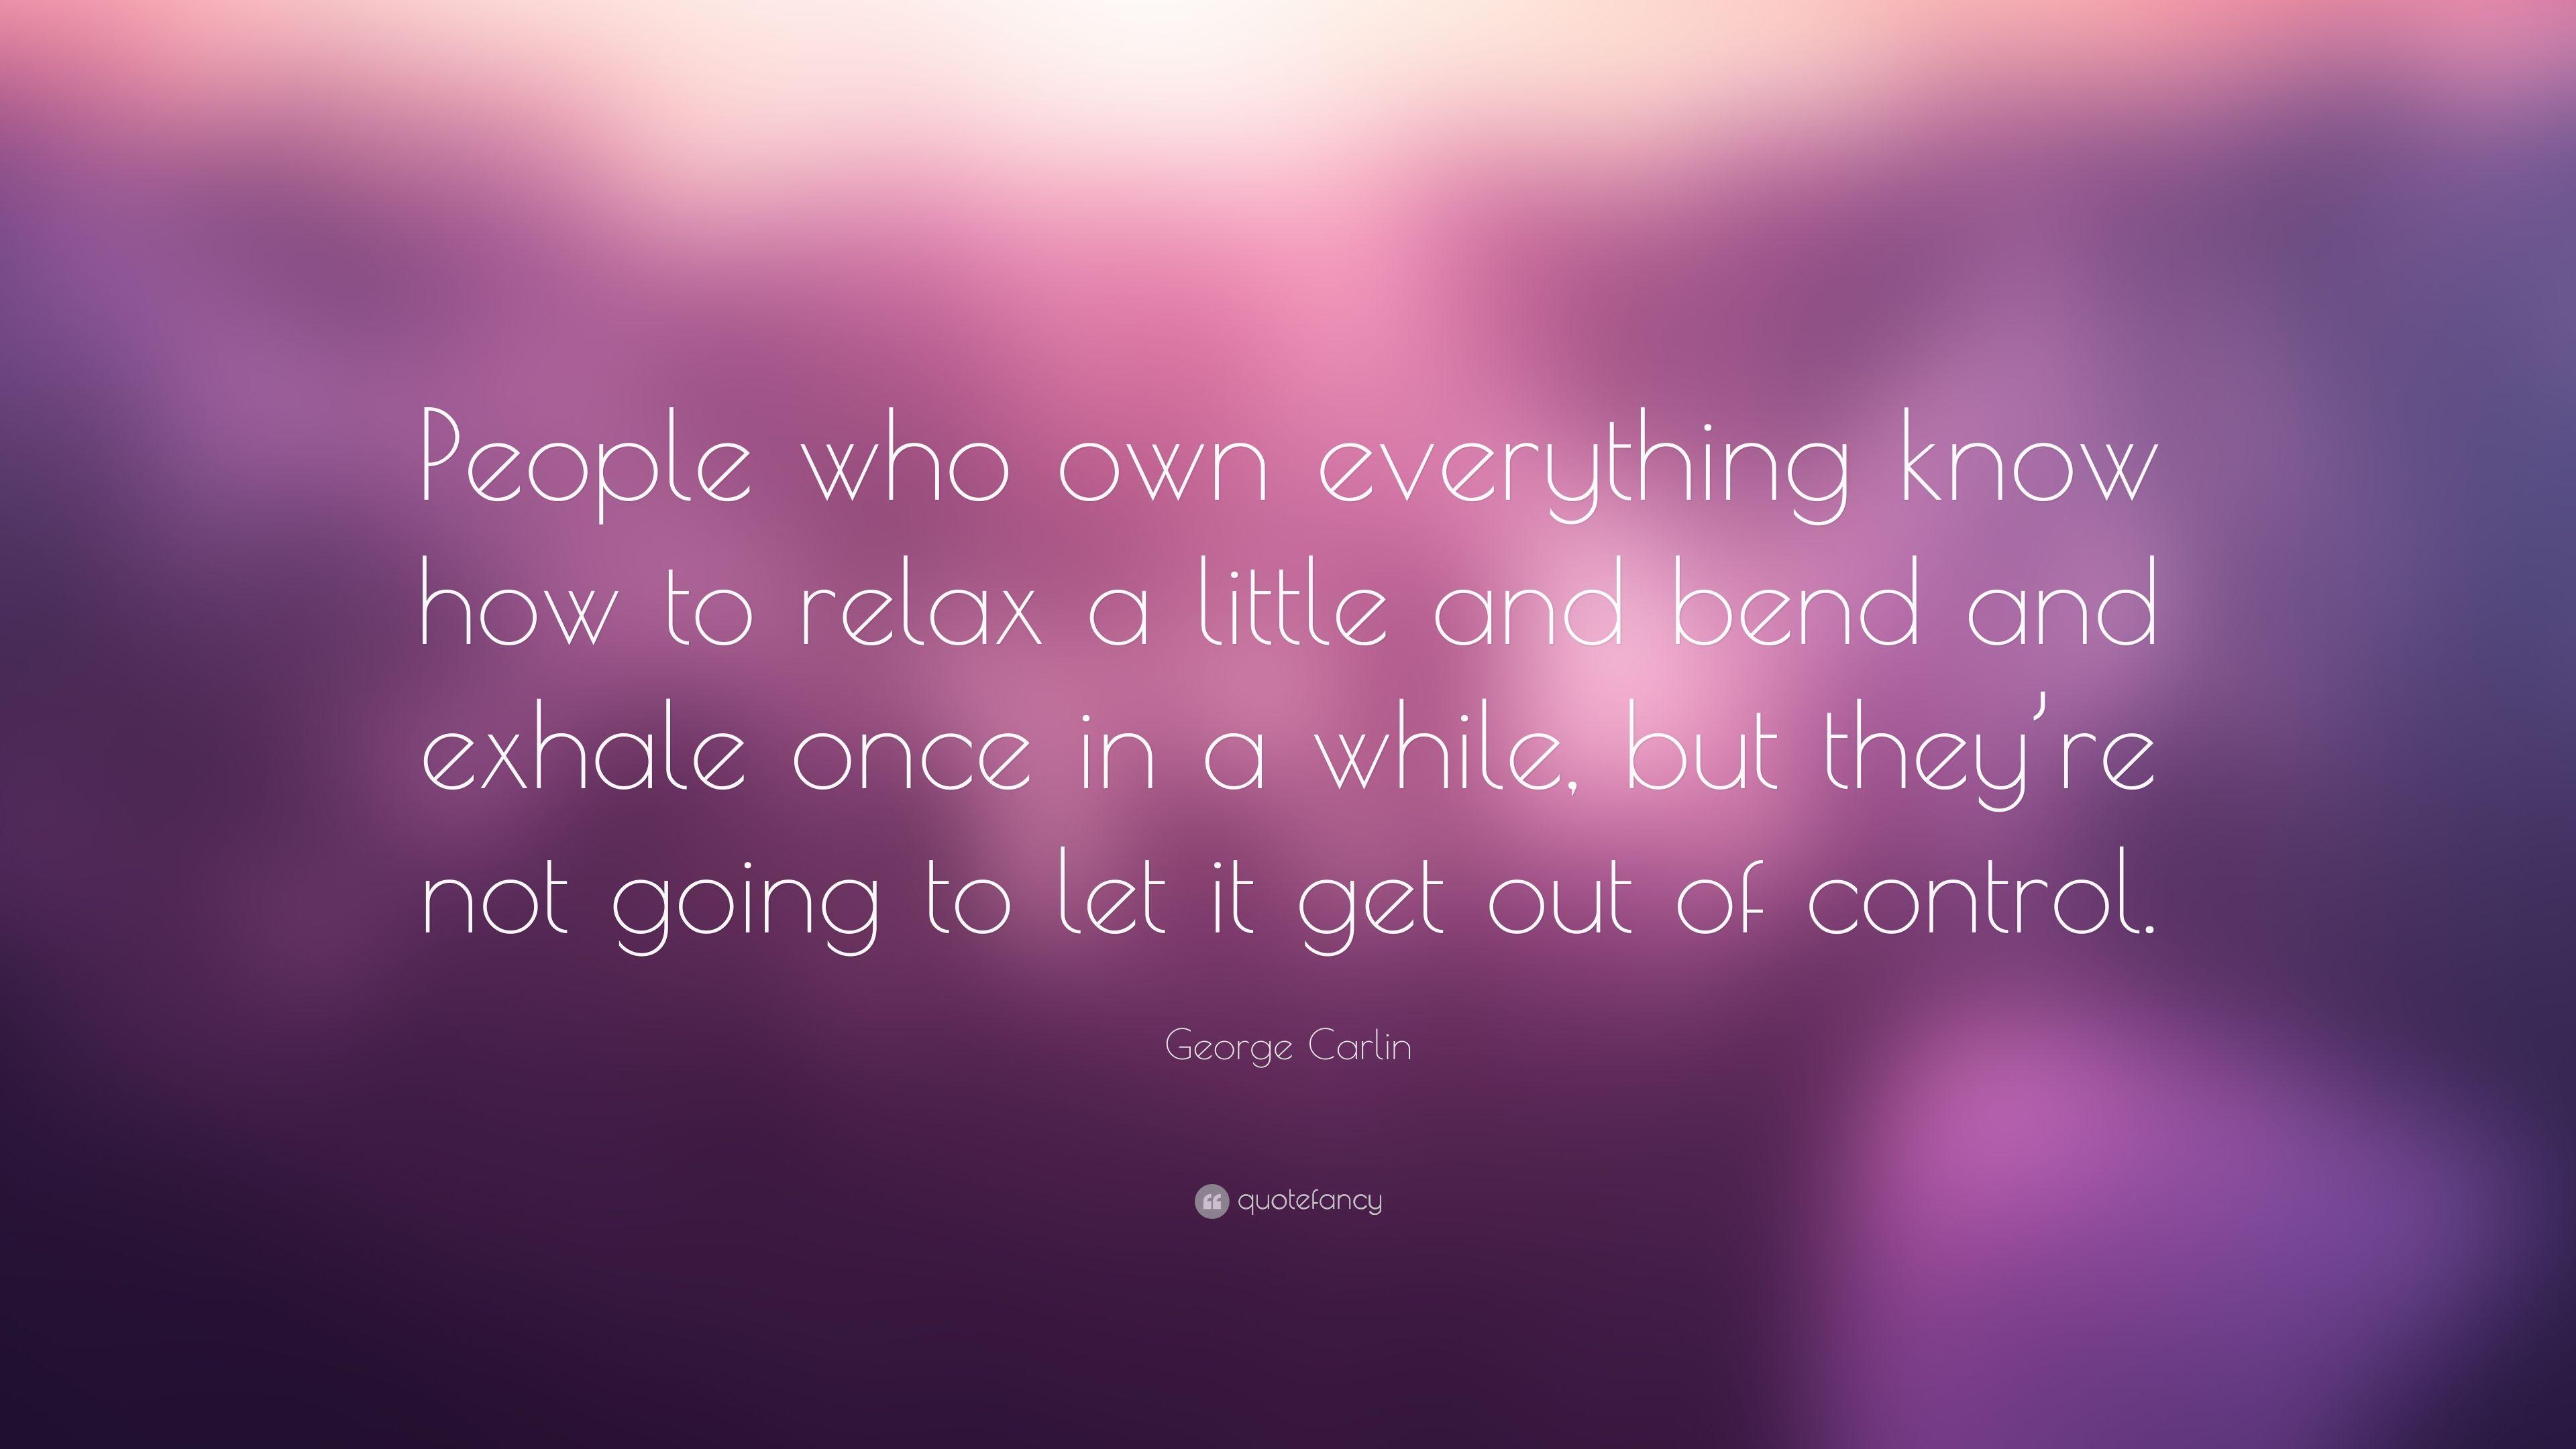 George Carlin Quote: “People who own everything know how to